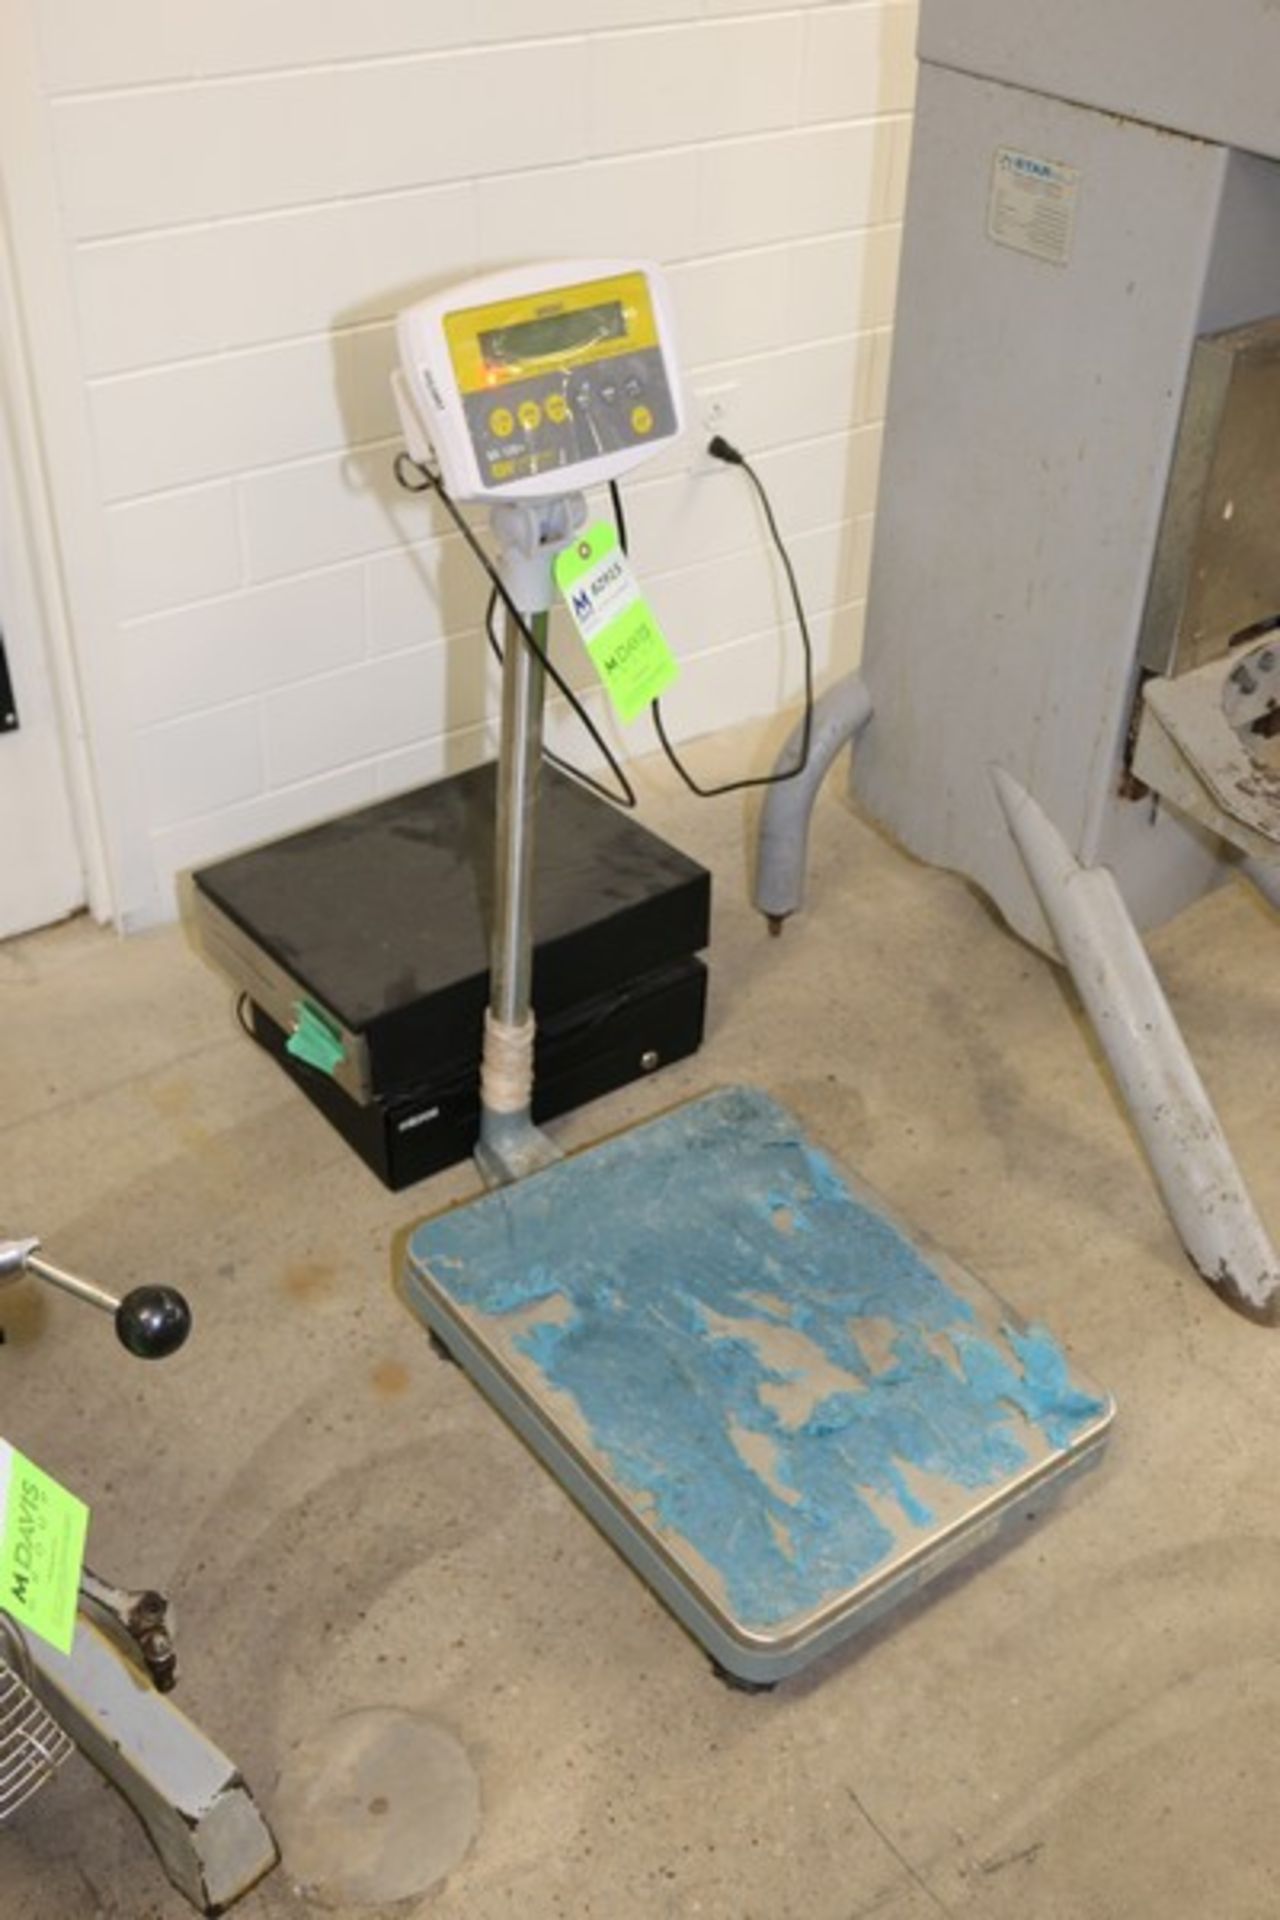 BW Easy Weigh Digital Platform Scale,M/N BX-120x, with (2) Micros Black Boxes, with Aprox. 20-1/2" L - Image 2 of 3